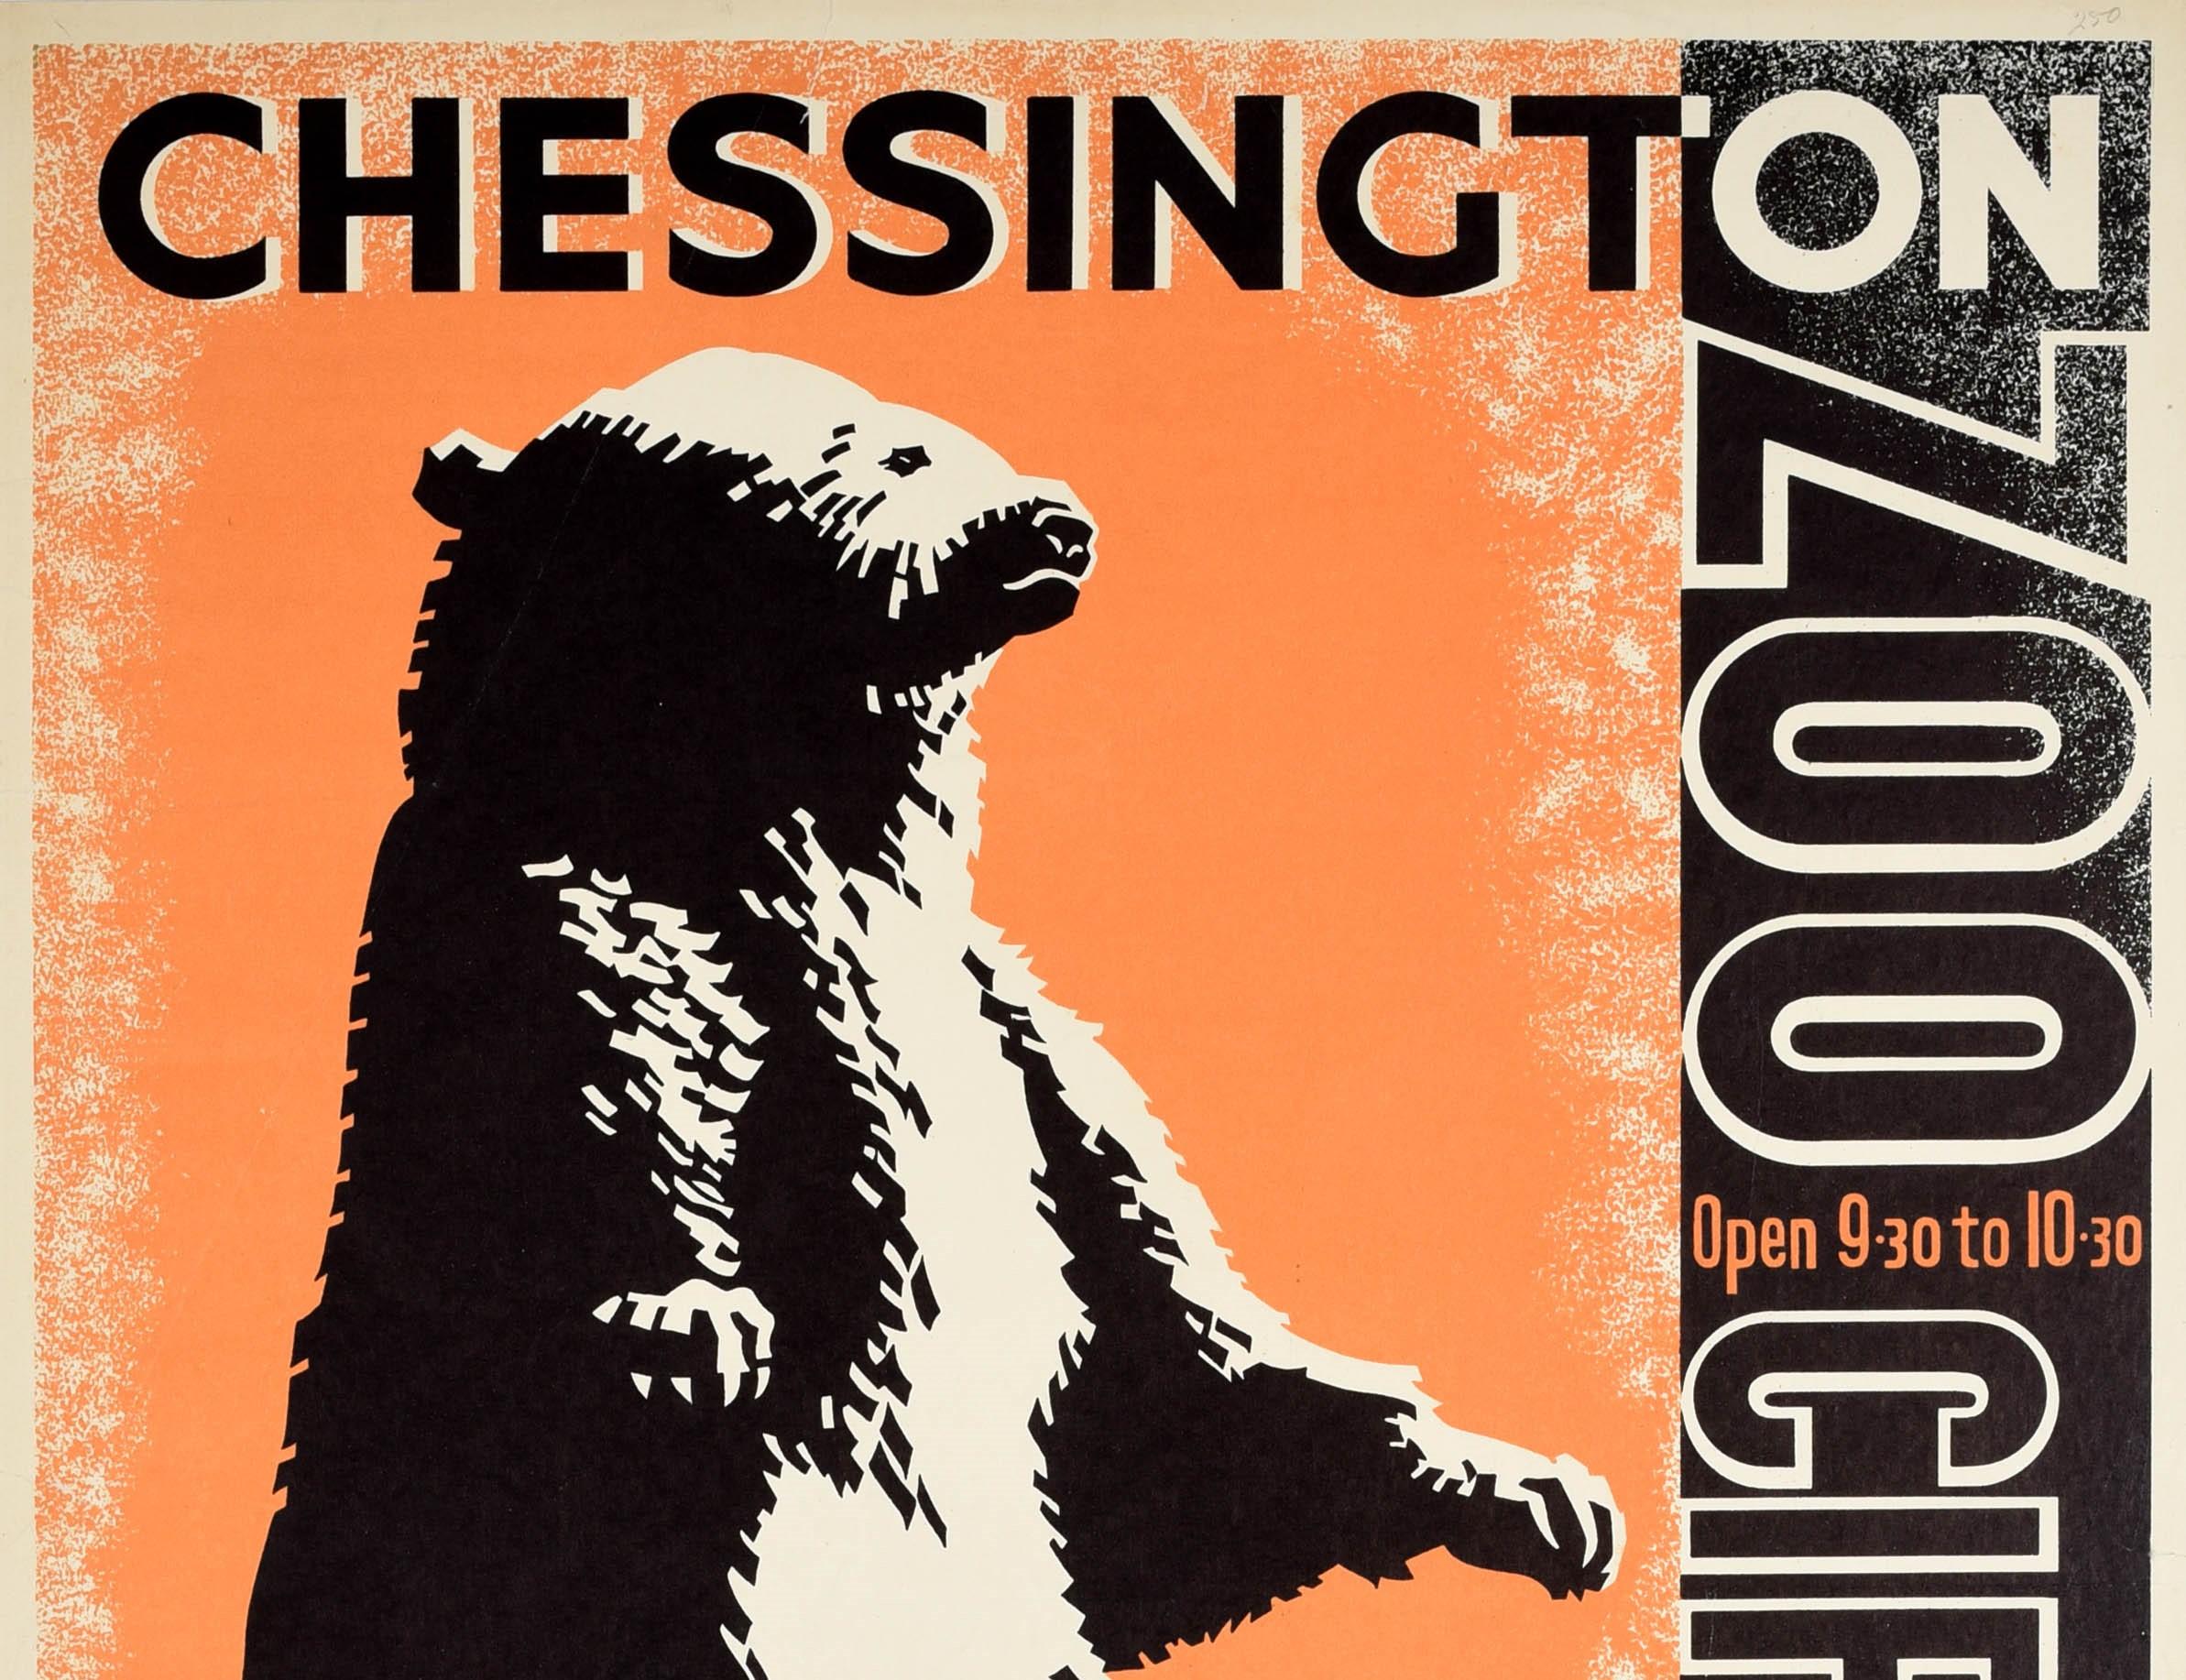 Original vintage advertising poster for Chessington Zoo Circus - 50 acres of beautiful grounds Fully licensed restaurant Popular prices Historical mansion The greatest value in amusements Combined rail and admission tickets from Southern Railway